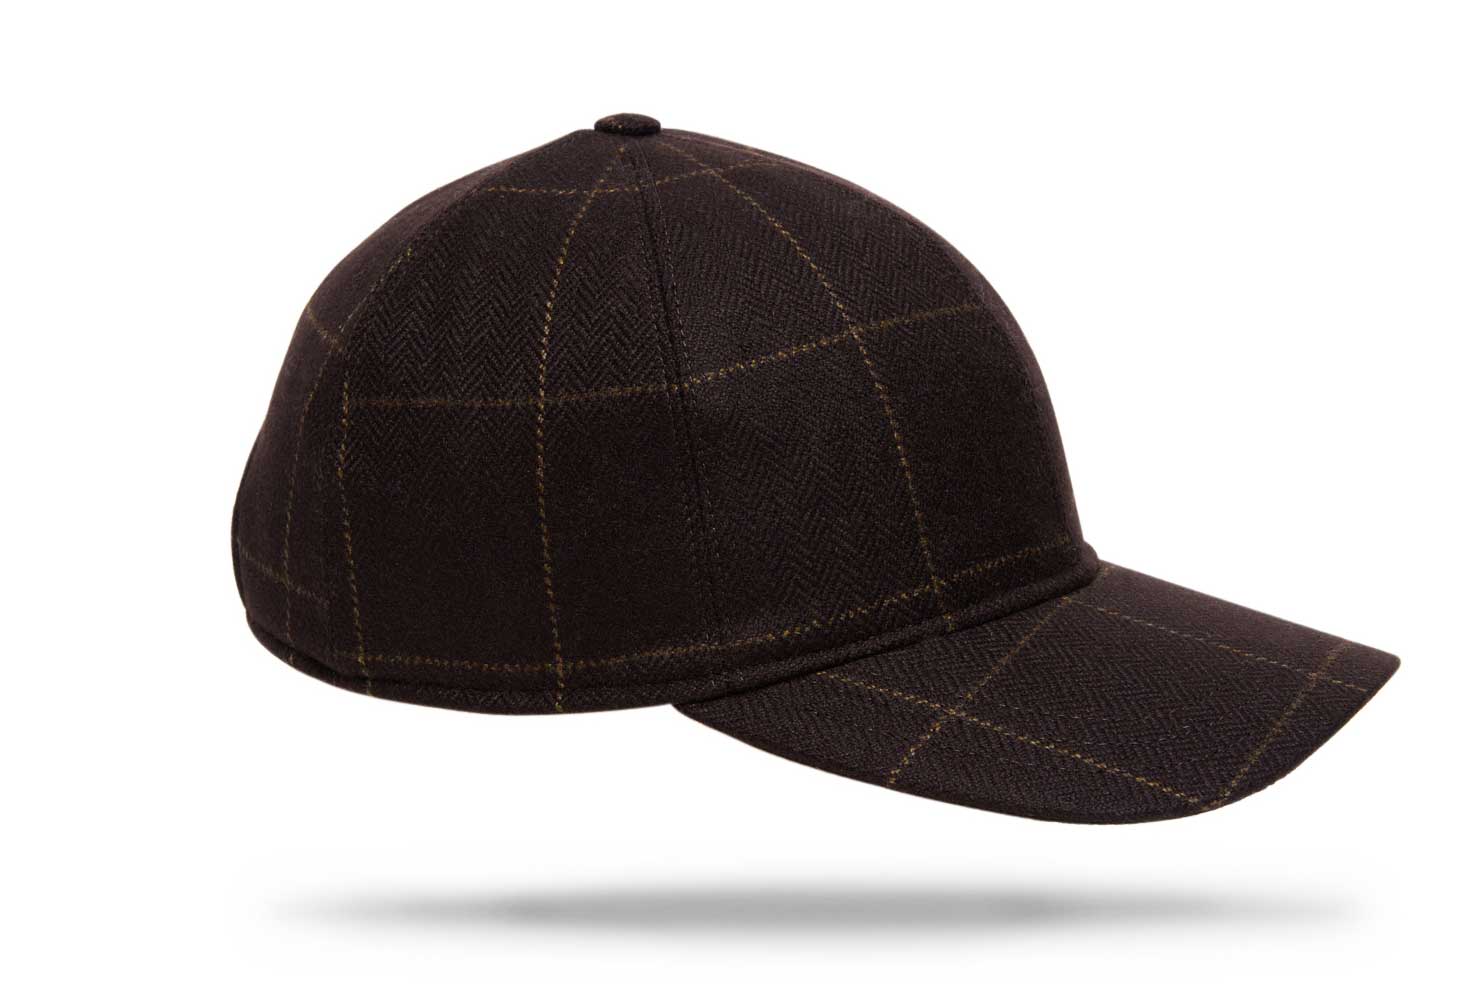 
Design
A refined and upgraded version of a timeless baseball cap for a modernized sportswear aesthetic. Crafted from 100% brown cashmere windowpane, this exquisite cashmere cap is constructed from six panels with a curved brim and is thoroughly made waterproof and wind-resistant. Ideal for leisure time teamed with casual outerwear. The perfect casual-luxe accessory for any ensemble.
Material
100% cashmere.
Specifications
- 100% Brown Windowpane Cashmere- Fully lined for comfort.- Handmade in Italy for Worth & Worth.